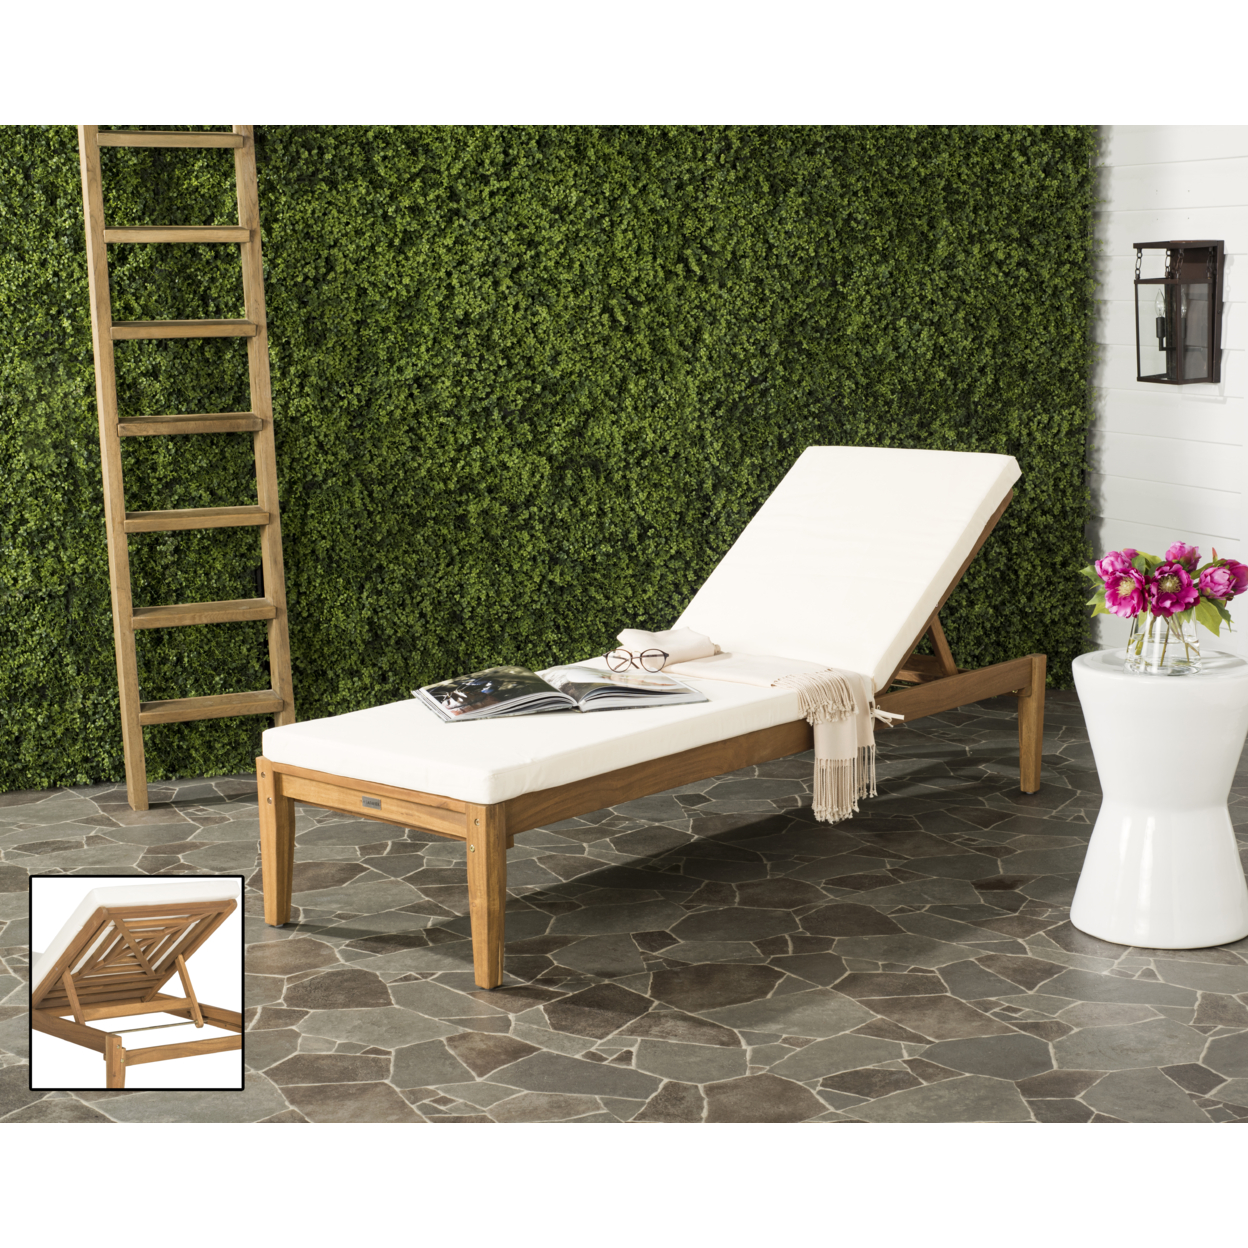 SAFAVIEH Outdoor Collection Arcata Chaise Sunlounger Natural/Beige